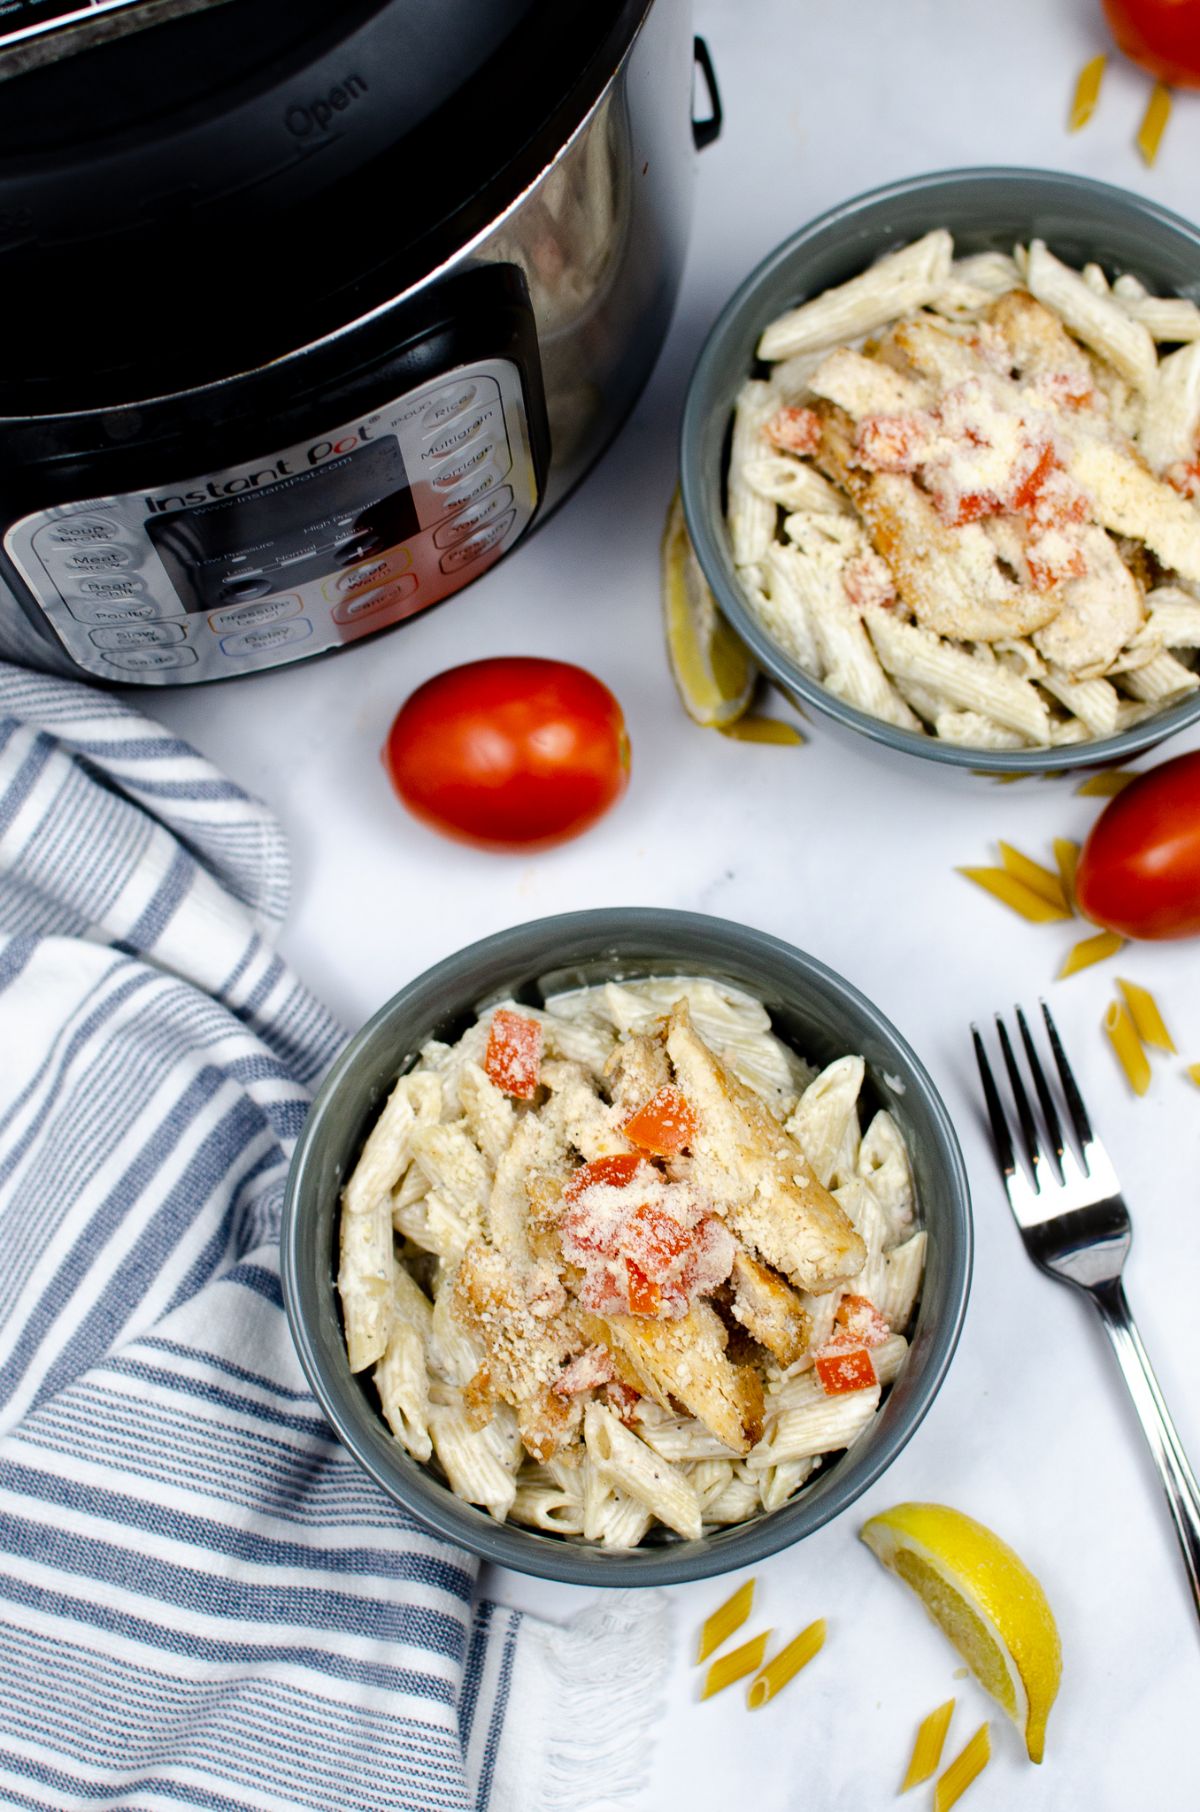 A vertical overhead shot of Instant Pot Cajun Chicken Pasta in a bowl placed at the center and another bowl, the Instant Pot, some tomatoes, and fork around the center bowl.